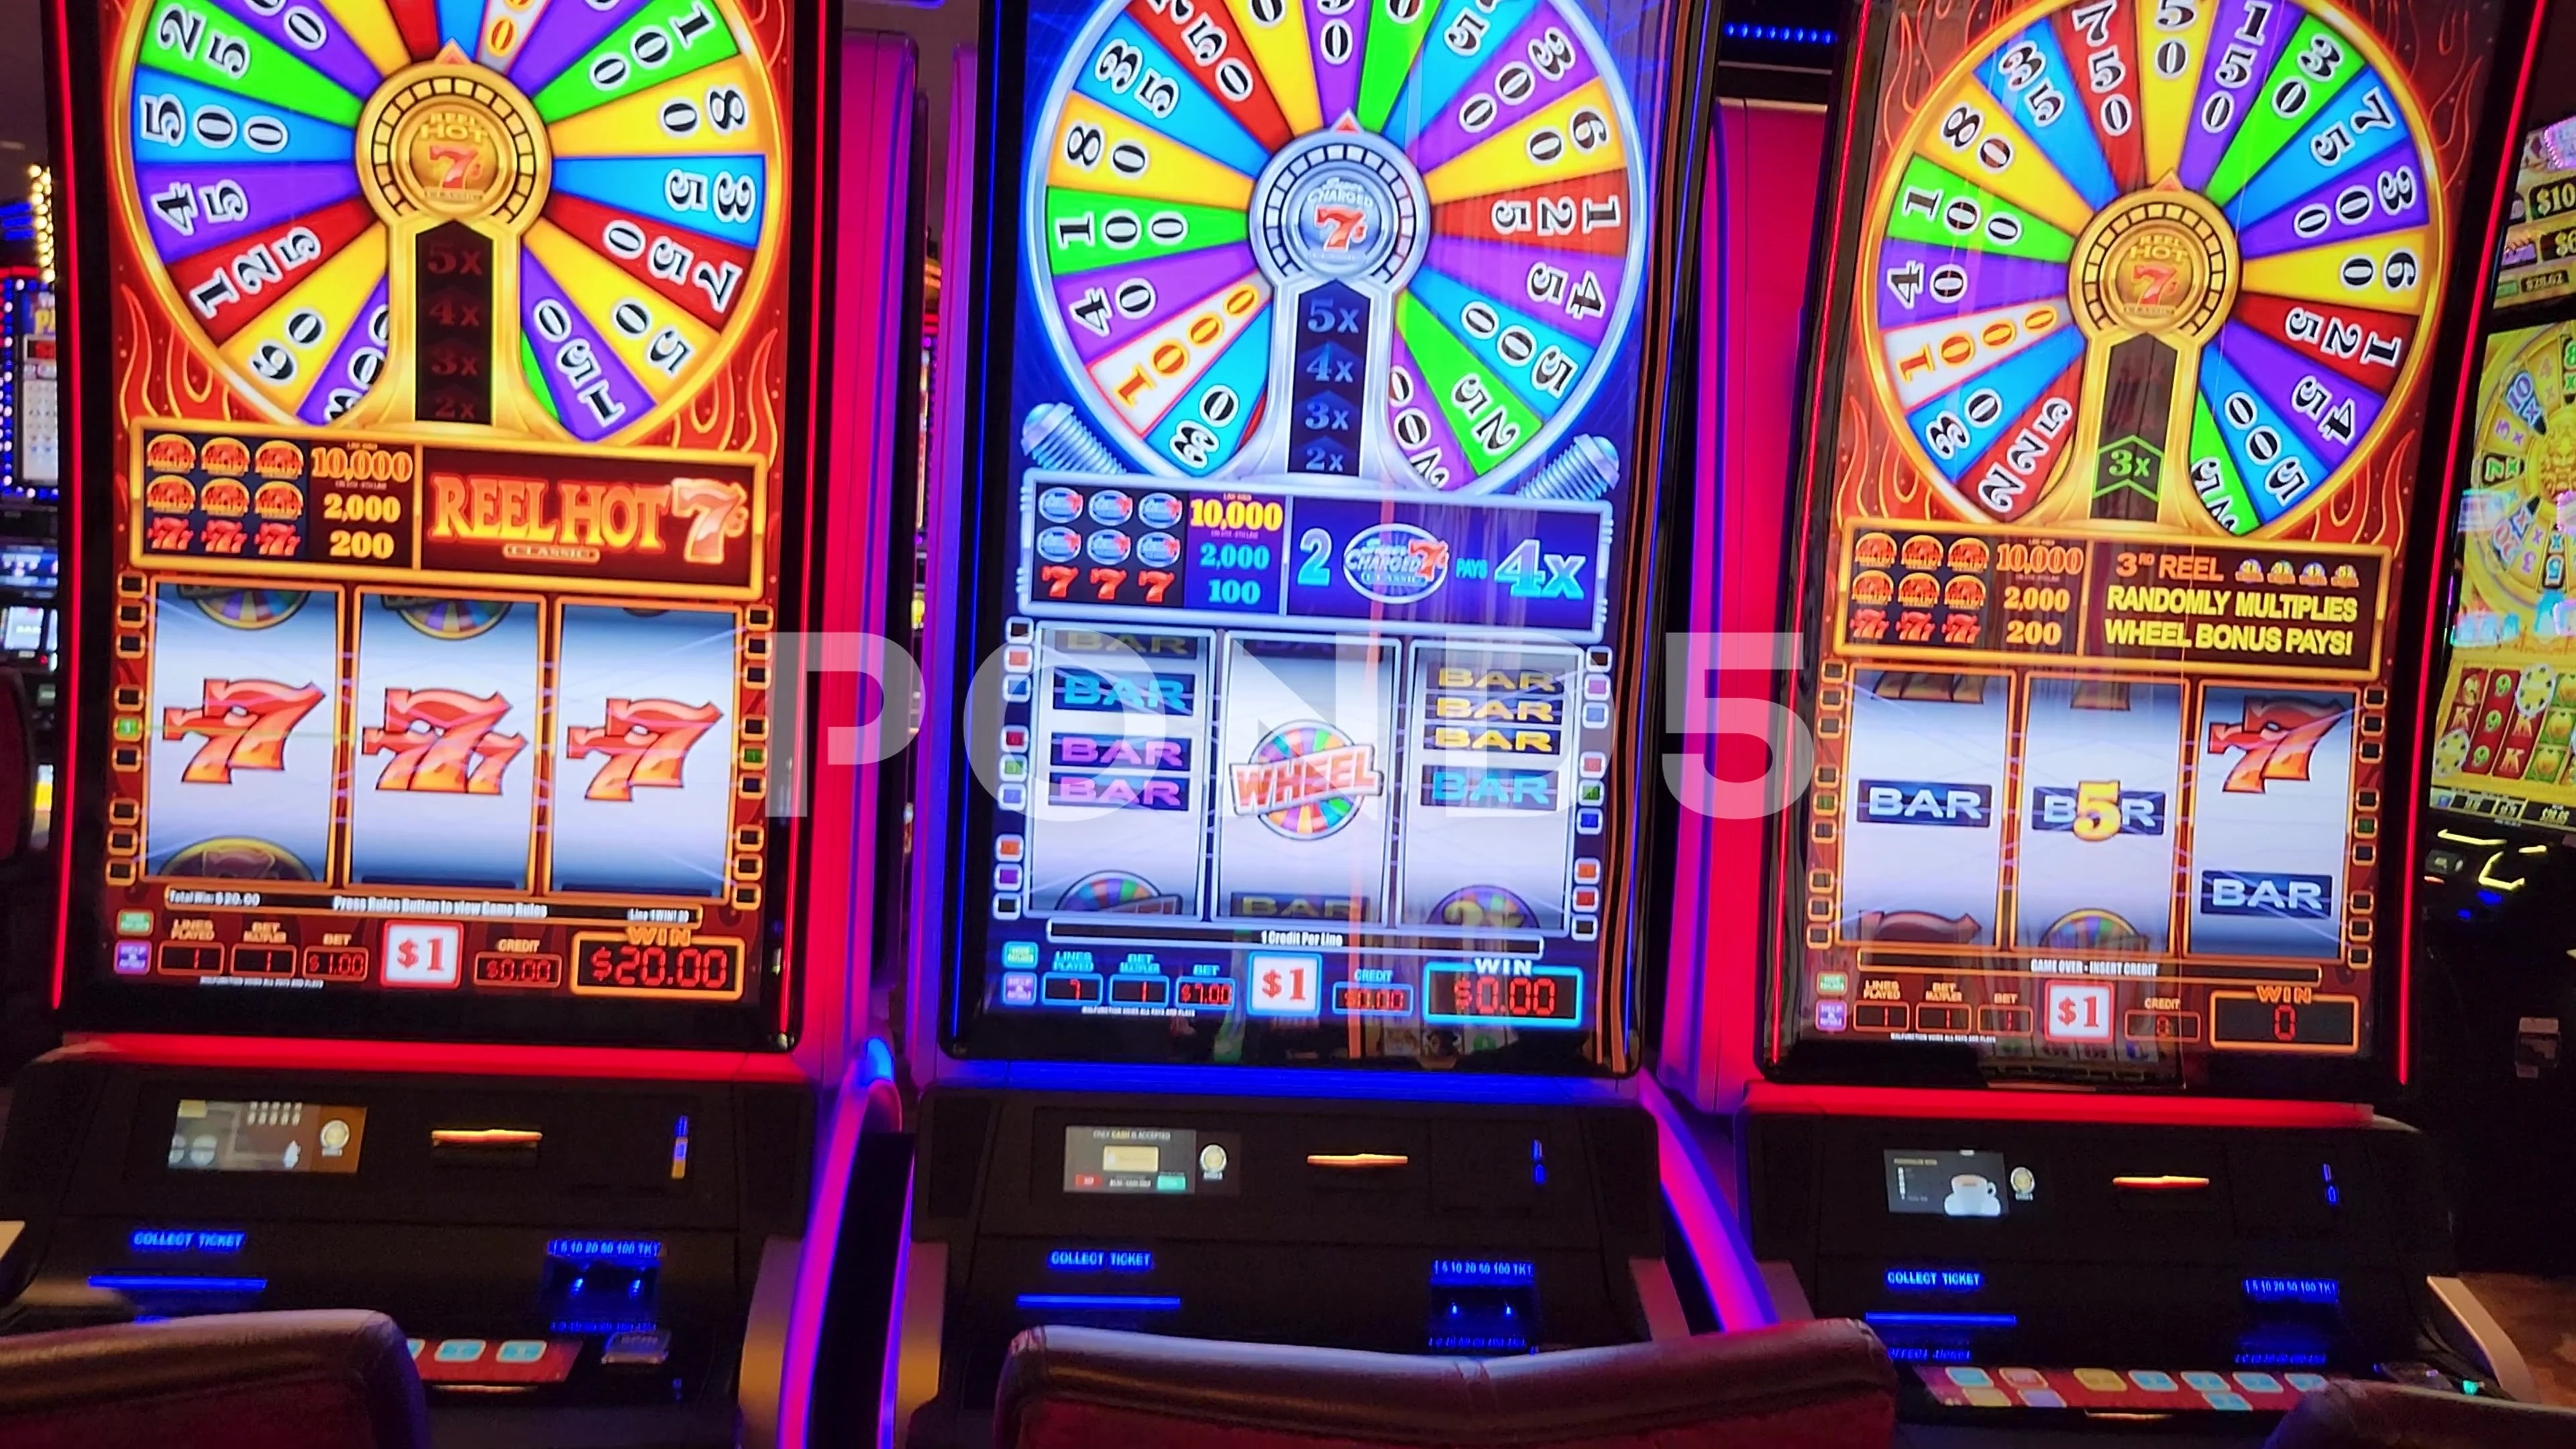 Wheel of Fortune Slot Machine: Online Free Play Slot Game For Fun